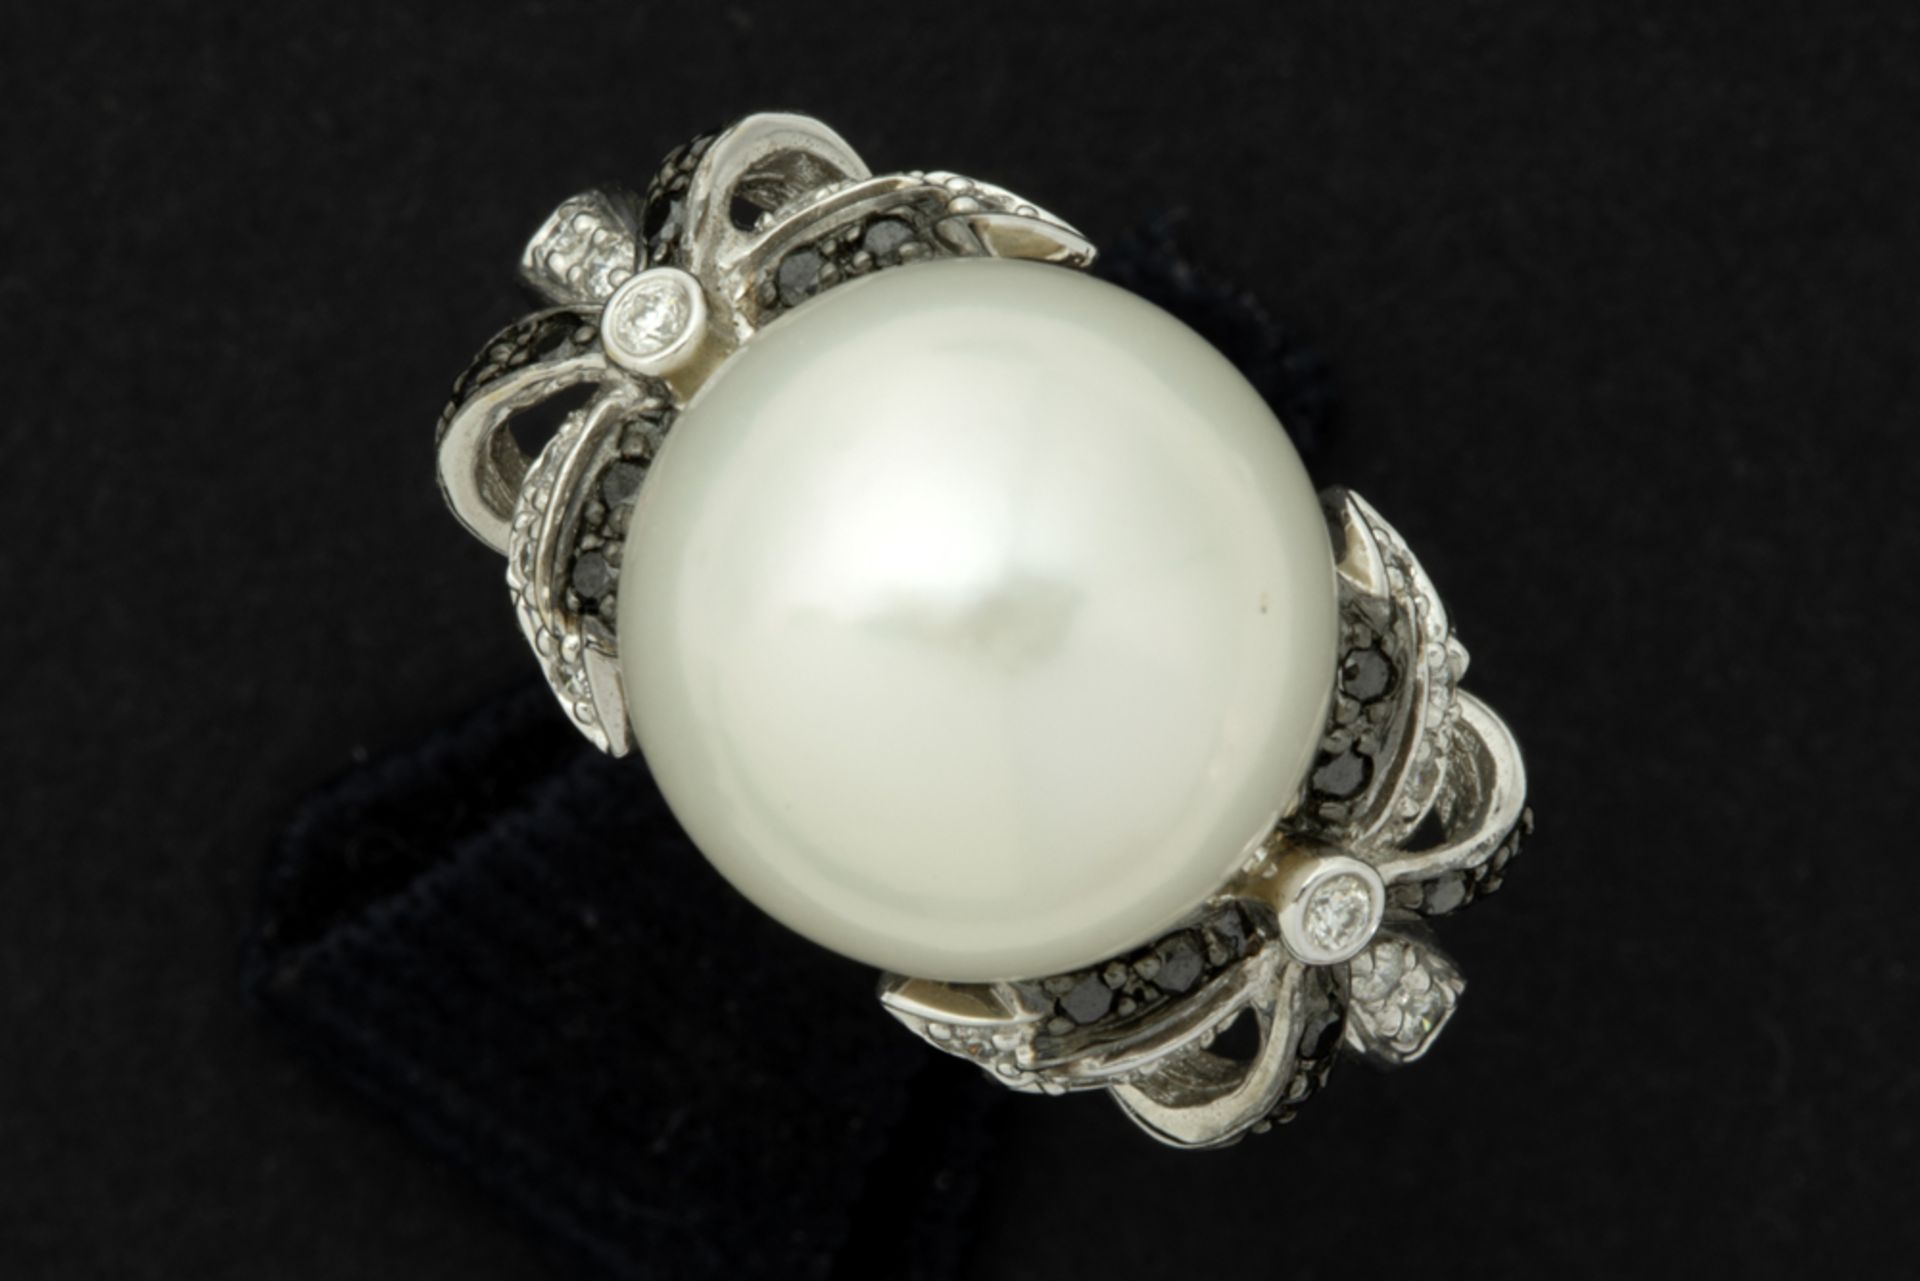 ring in white gold (18 carat) with a quite big South Sea pearl and more than 0,30 carat of black and